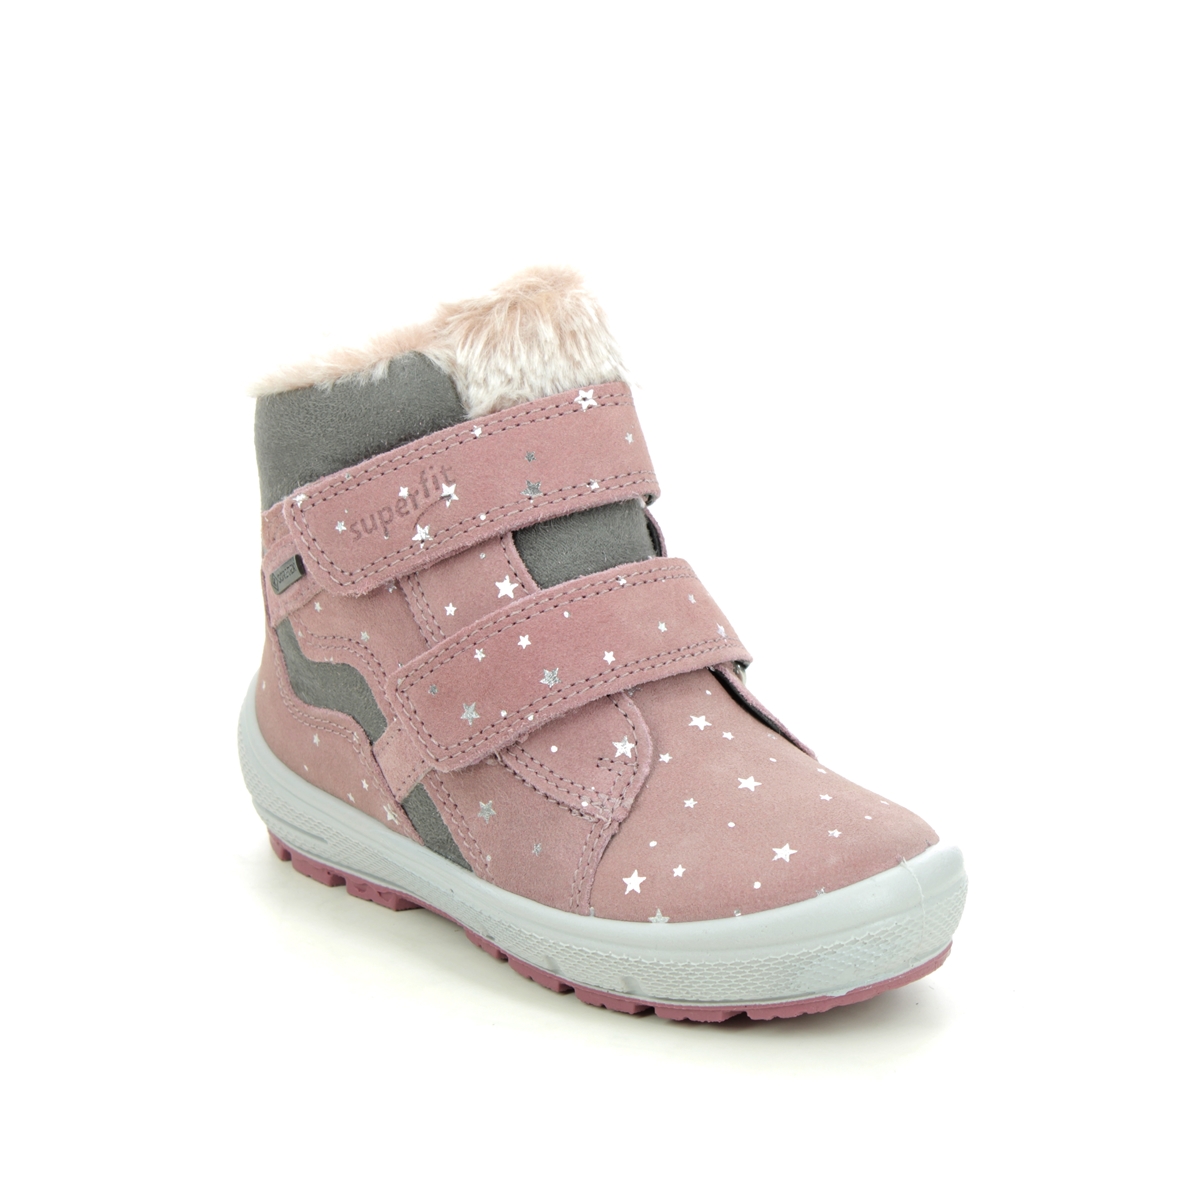 Superfit Groovy Gtx Pink Leather Kids Toddler Girls Boots 1006316-5500 In Size 25 In Plain Pink Leather